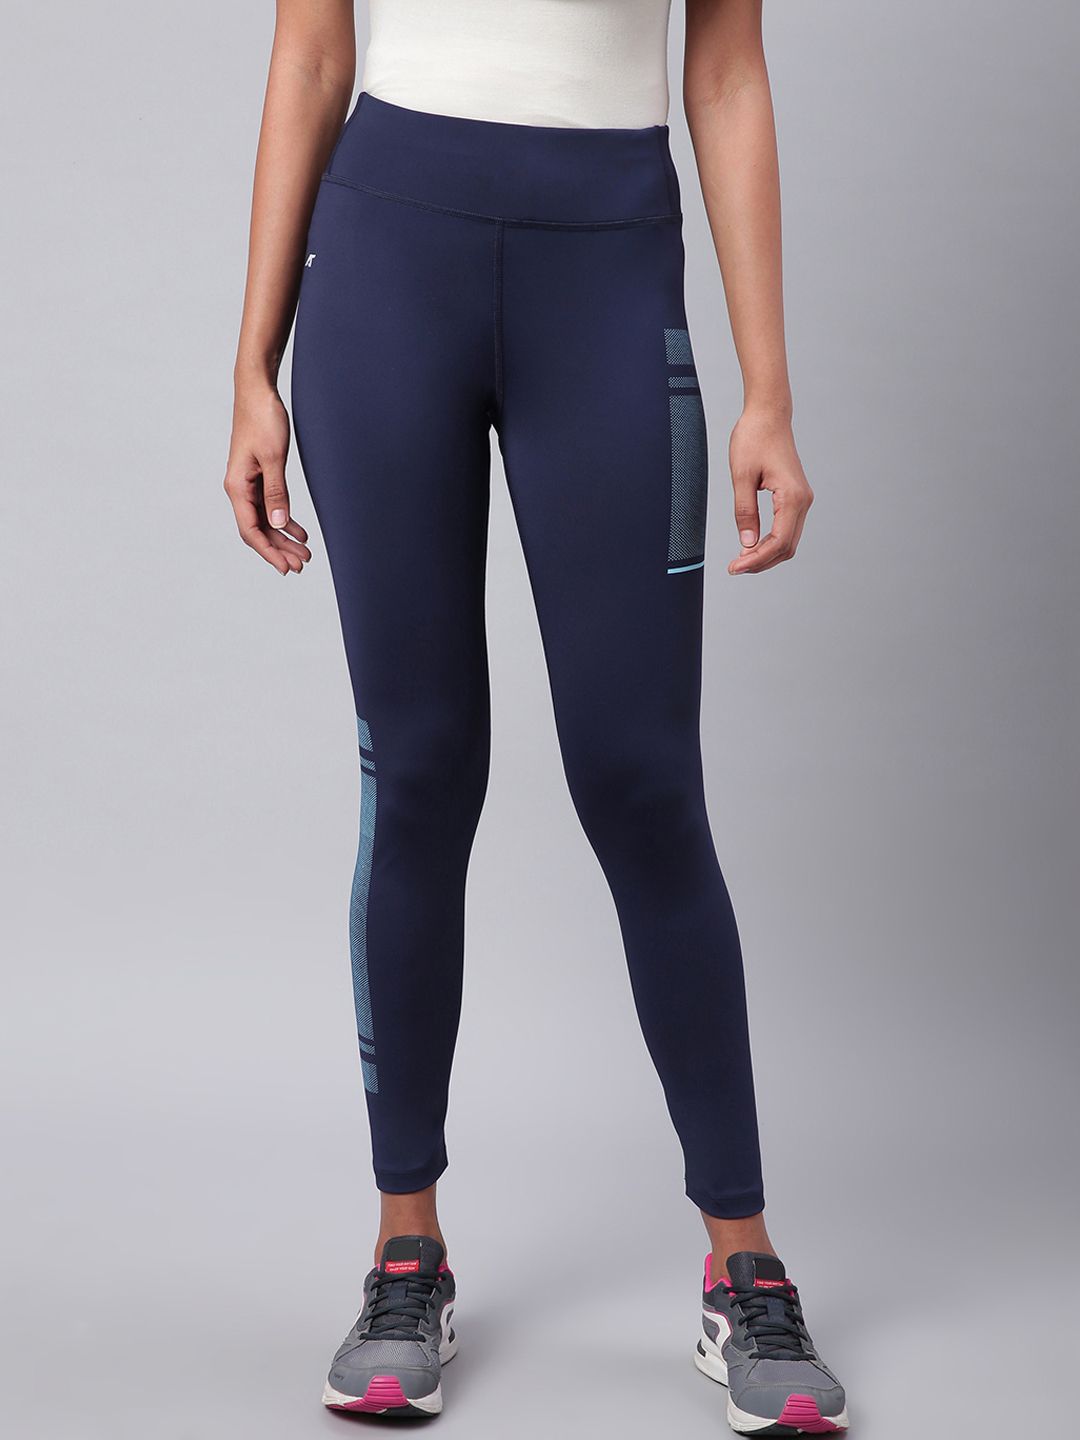 Alcis Women Navy Blue Rapid Dry Solid Cropped Training Tights Price in India